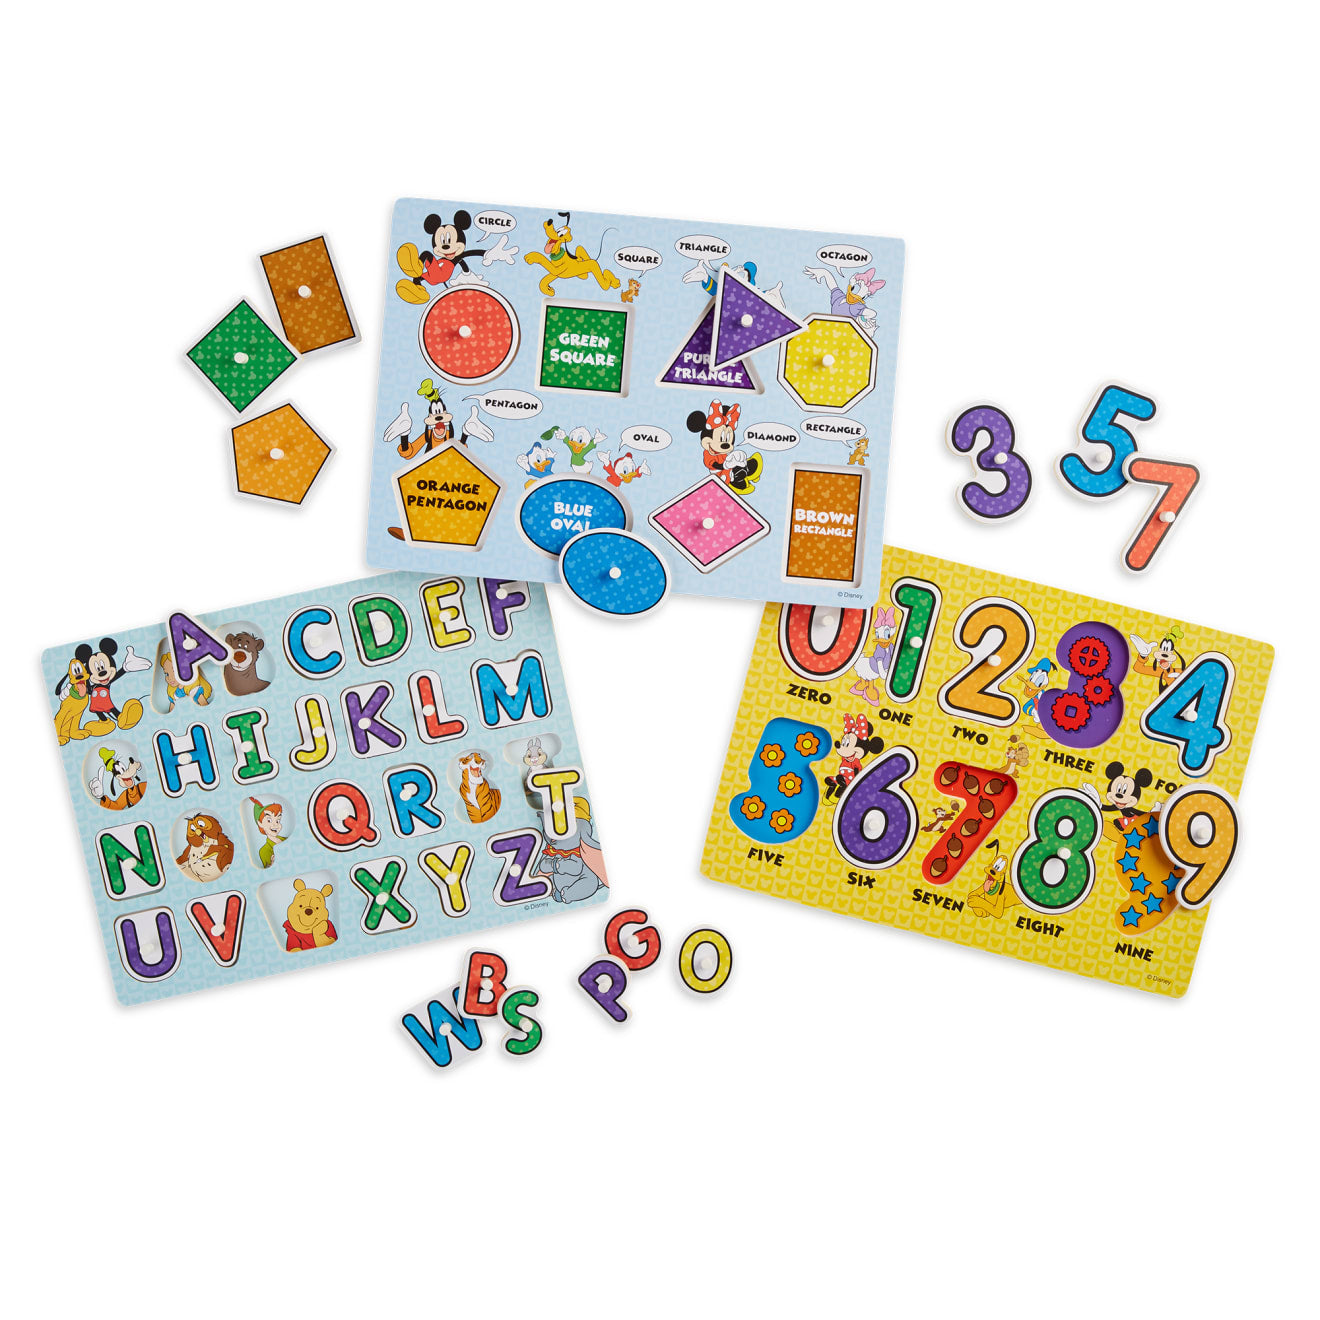 Wooden Peg Puzzles Set for Toddlers 2 3 4 Years Old, Alphabet ABC, Numbers, Shape and Farm Animals Learning Puzzles Board for Kids, Preschool